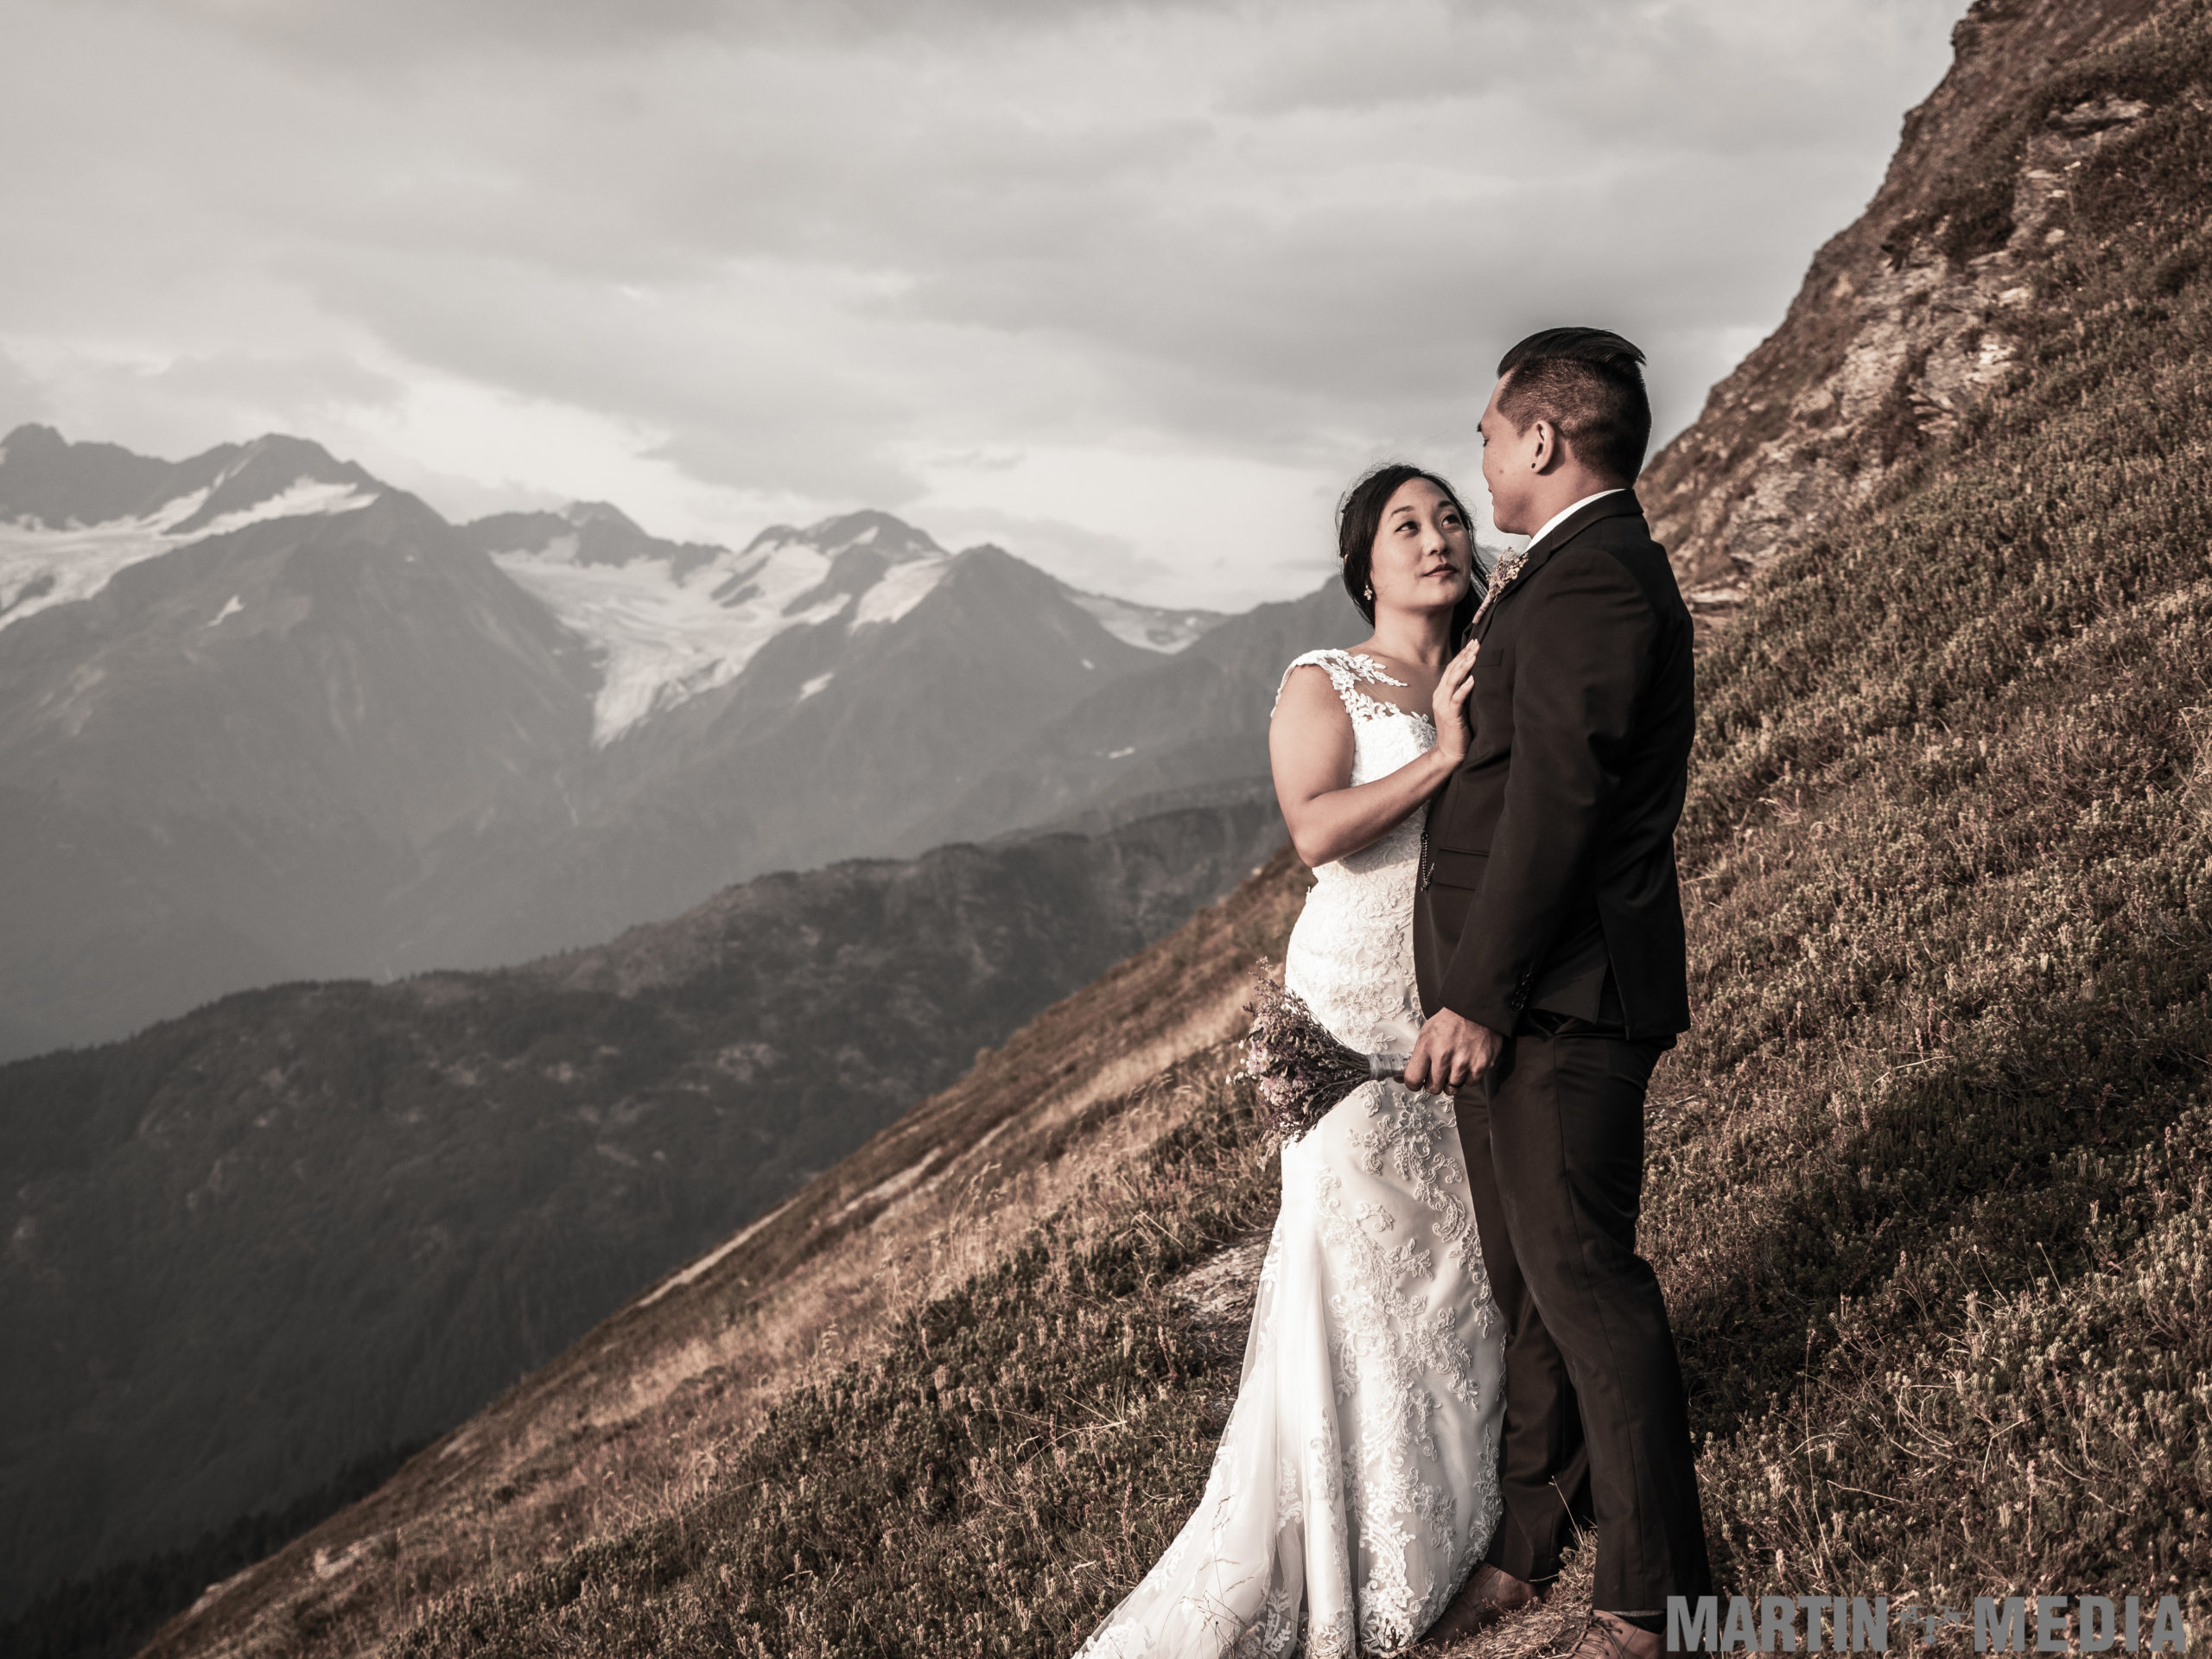 Why Wedding Photography Should be a Priority